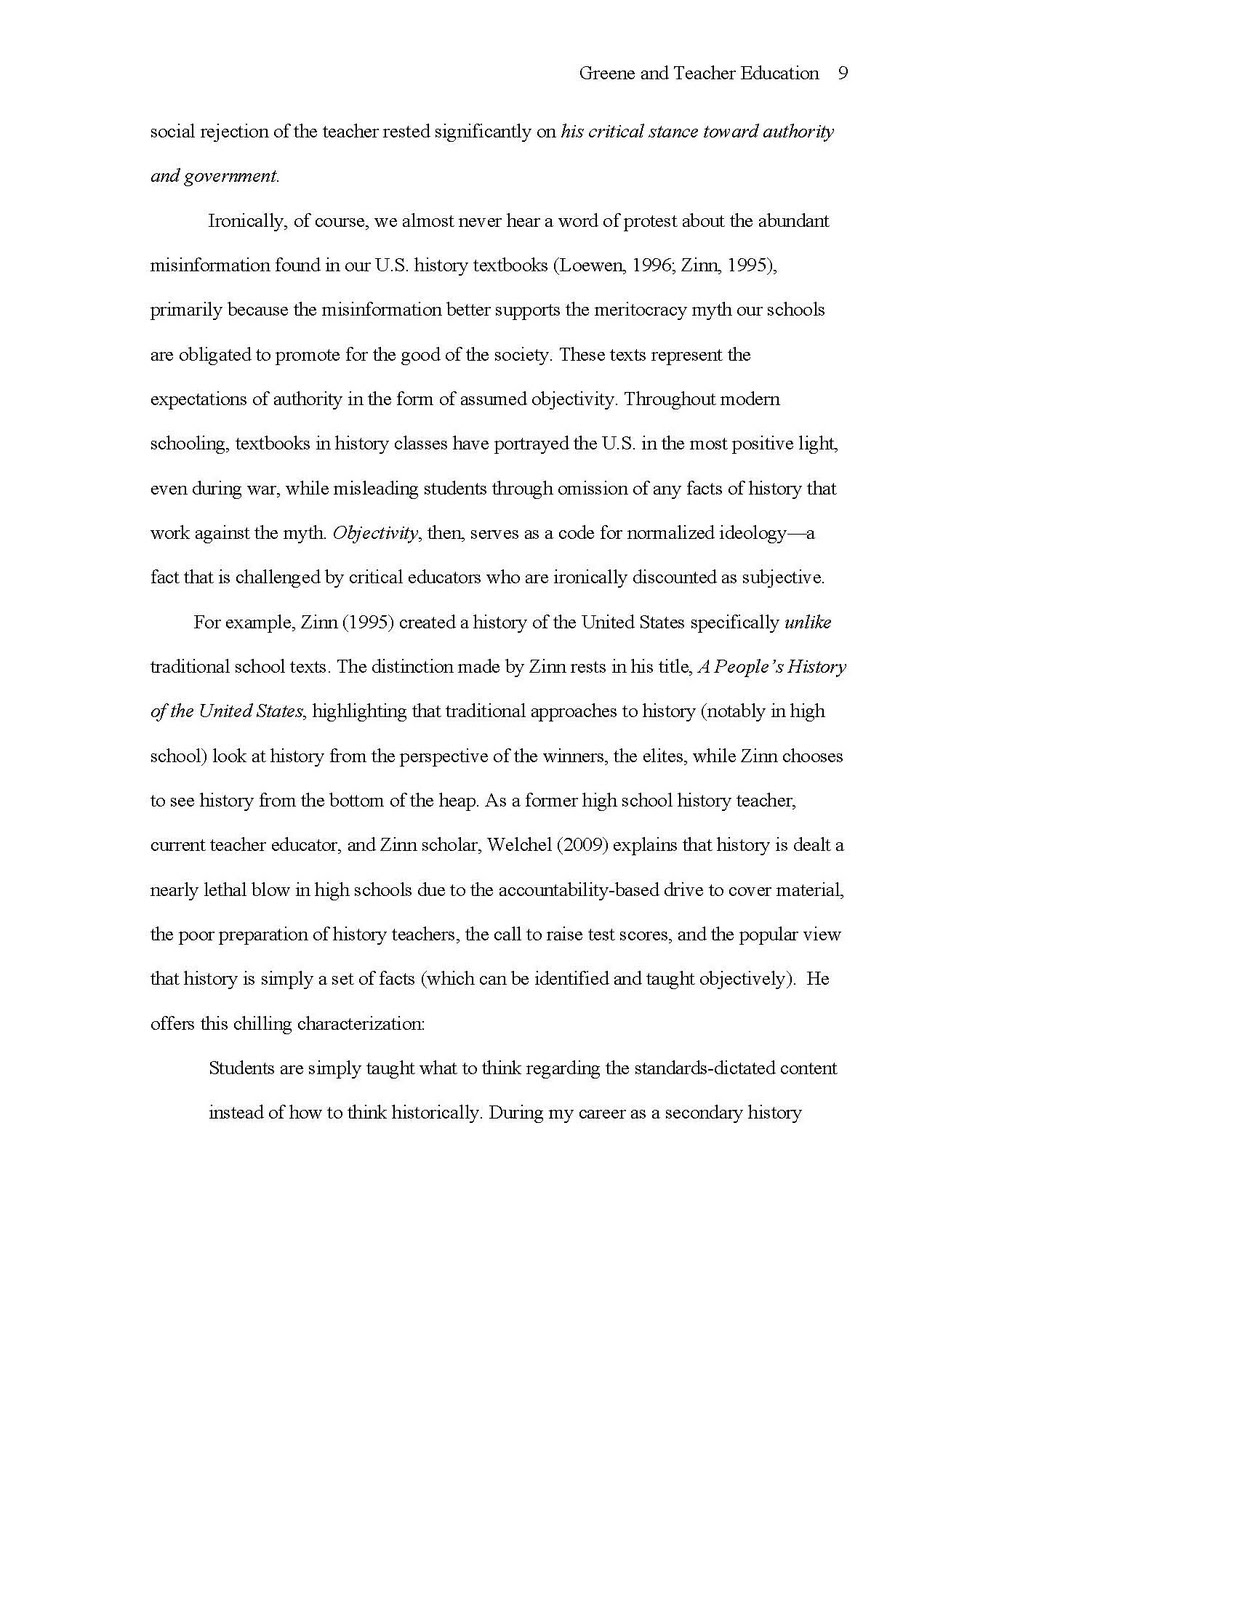 Download Apa Paper Template Word 2010 Free Software - Multimediautorrent Throughout Apa Template For Word 2010